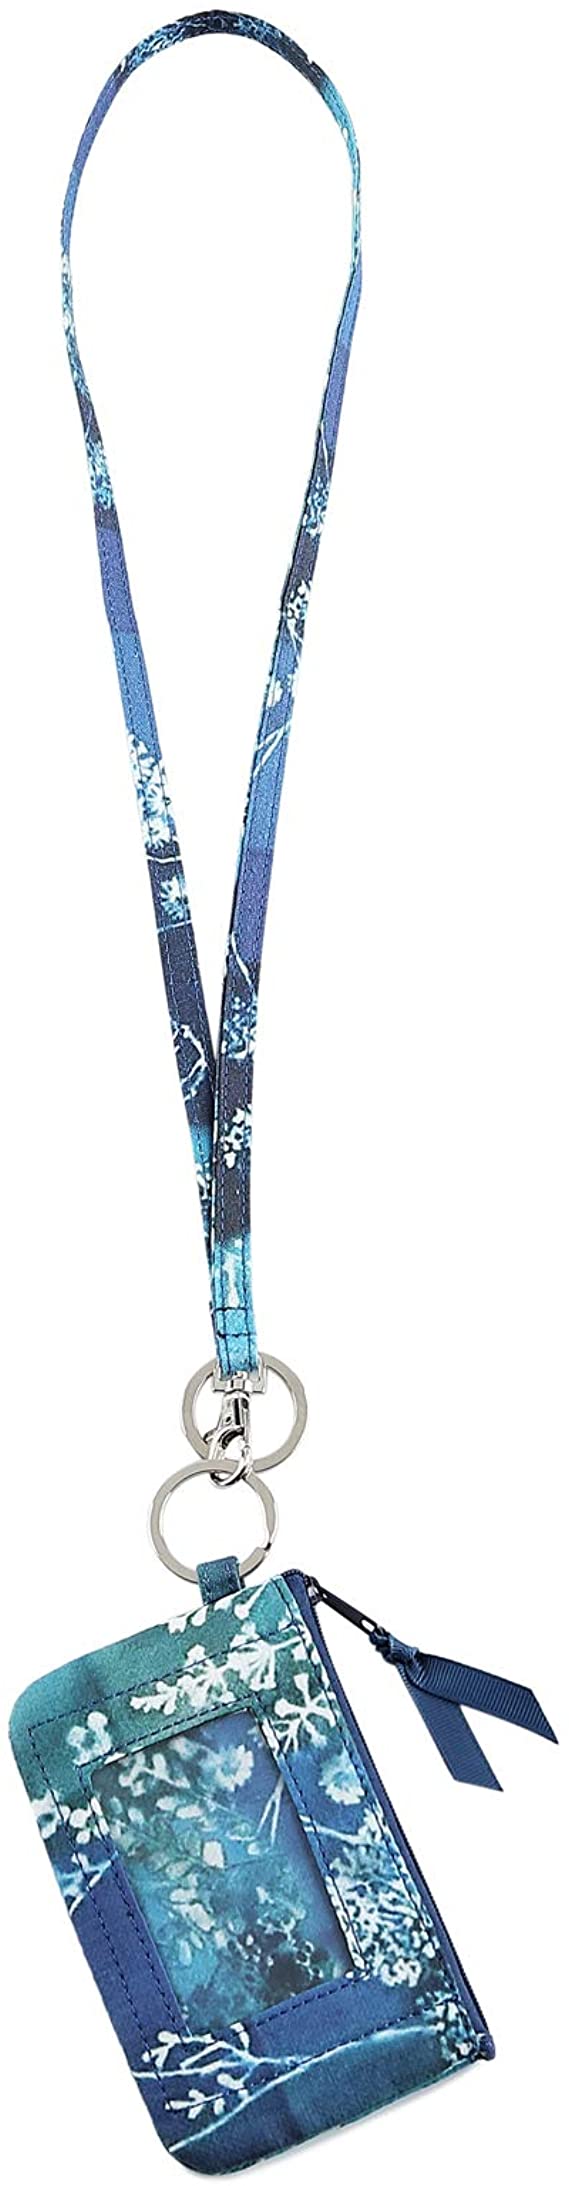 Lam Gallery Fashion Lanyard Wallet ID Badge Holder Lanyards for Office and School